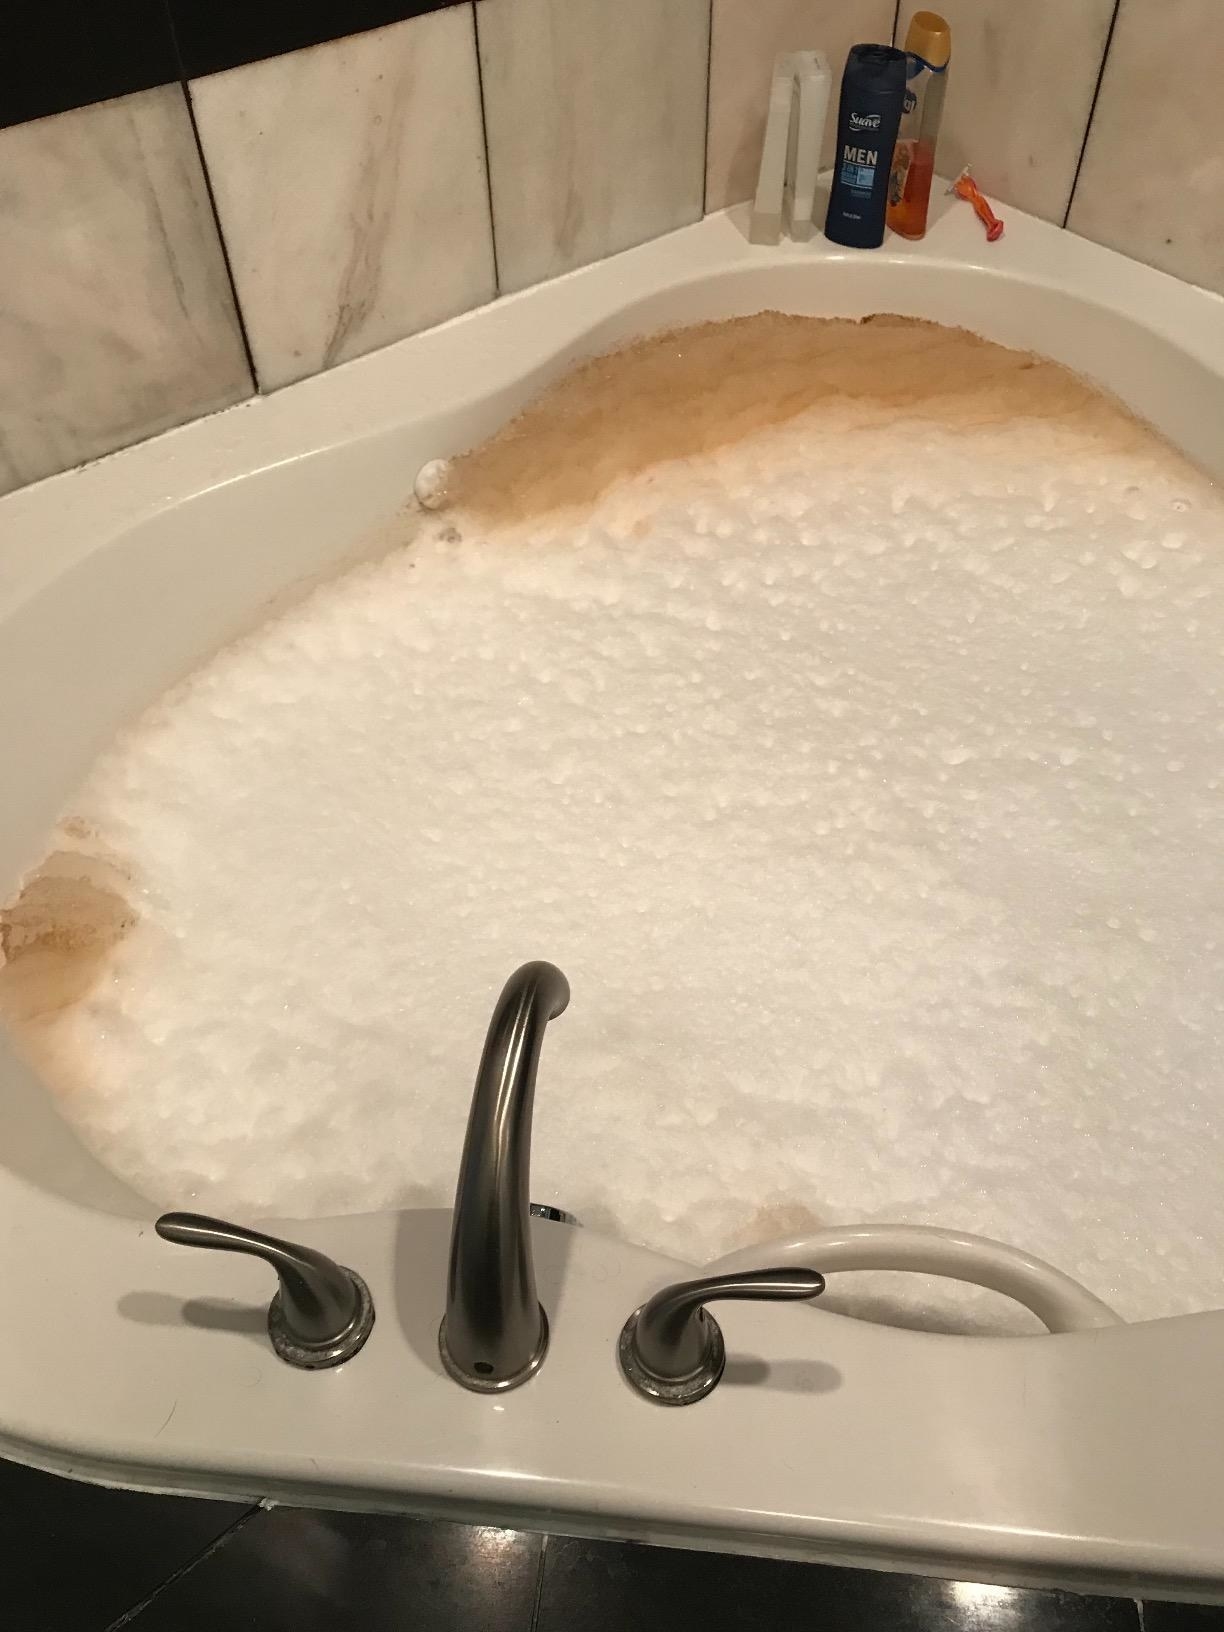 S With Before And After Photos, How To Get Brown Water Stains Out Of Bathtub